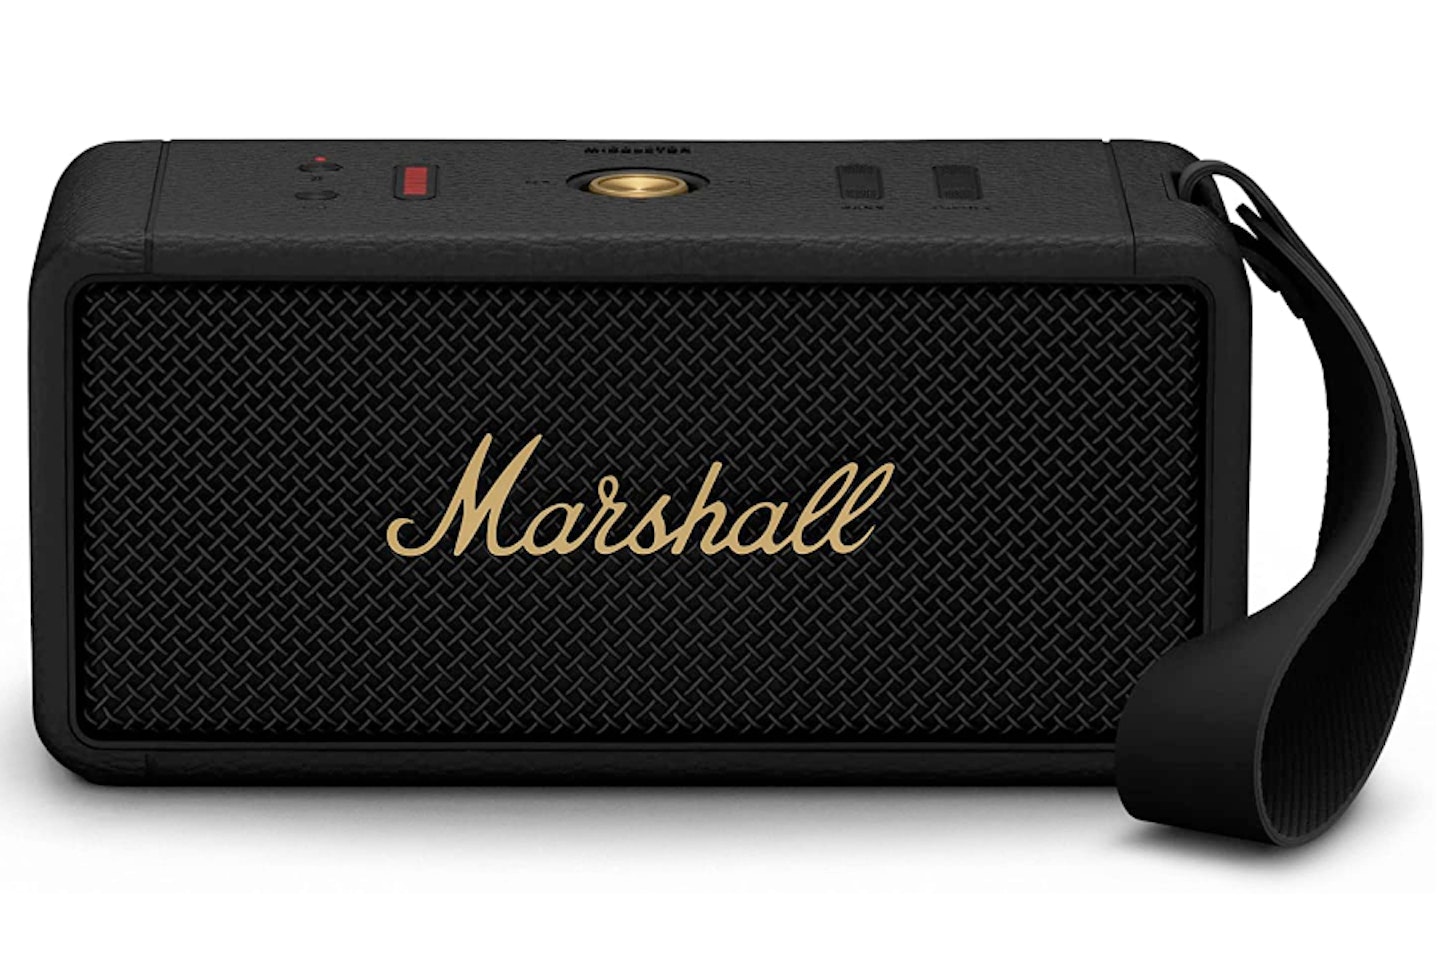 Marshall Middleton Bluetooth Wireless Portable Speaker - one of the best speakers for music